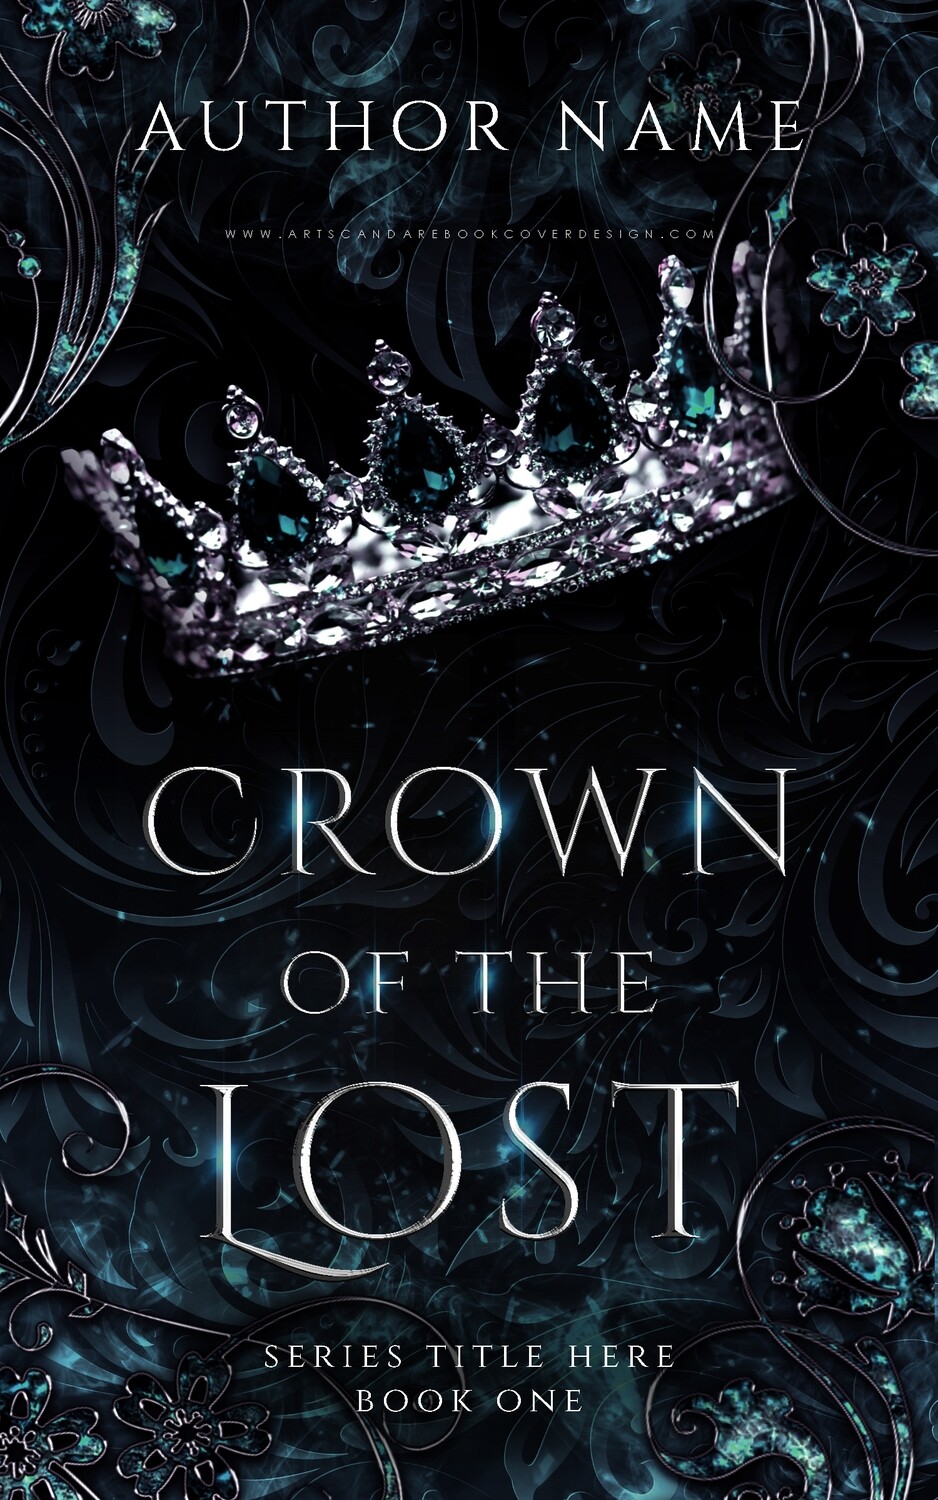 Ebook: Crown of the Lost